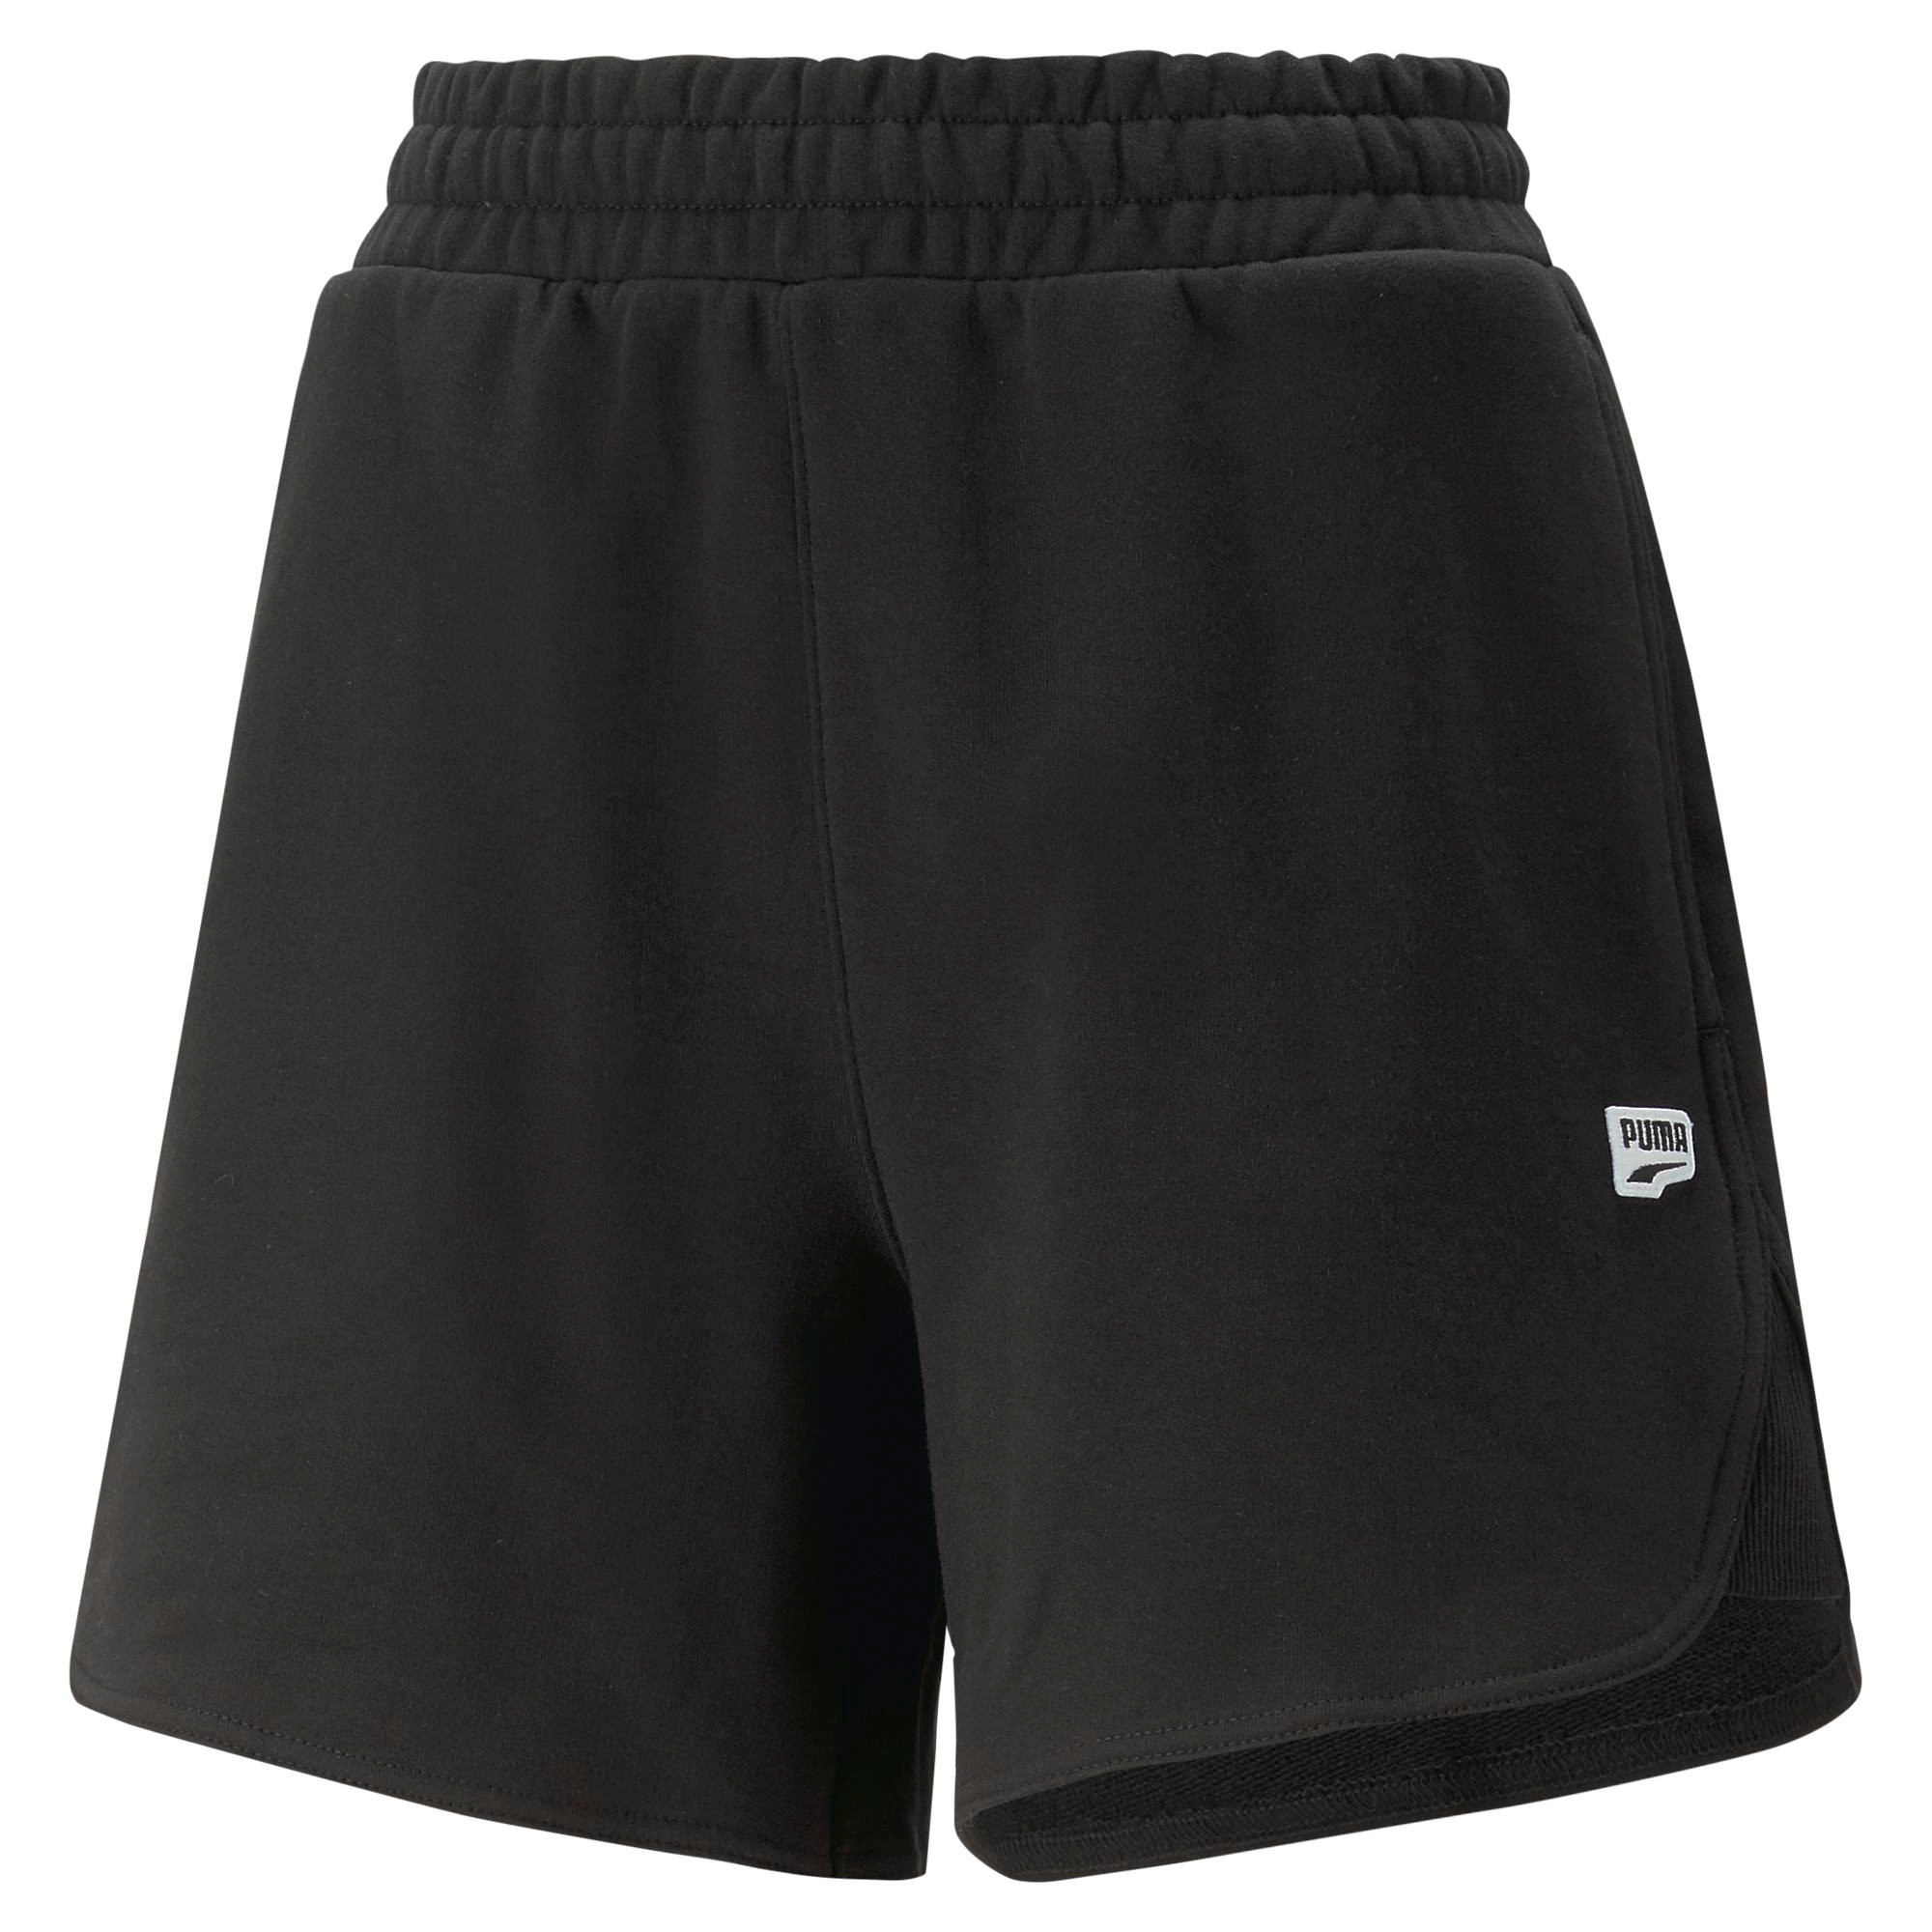 Puma - Downtown high-waisted shorts, Black, large image number 0